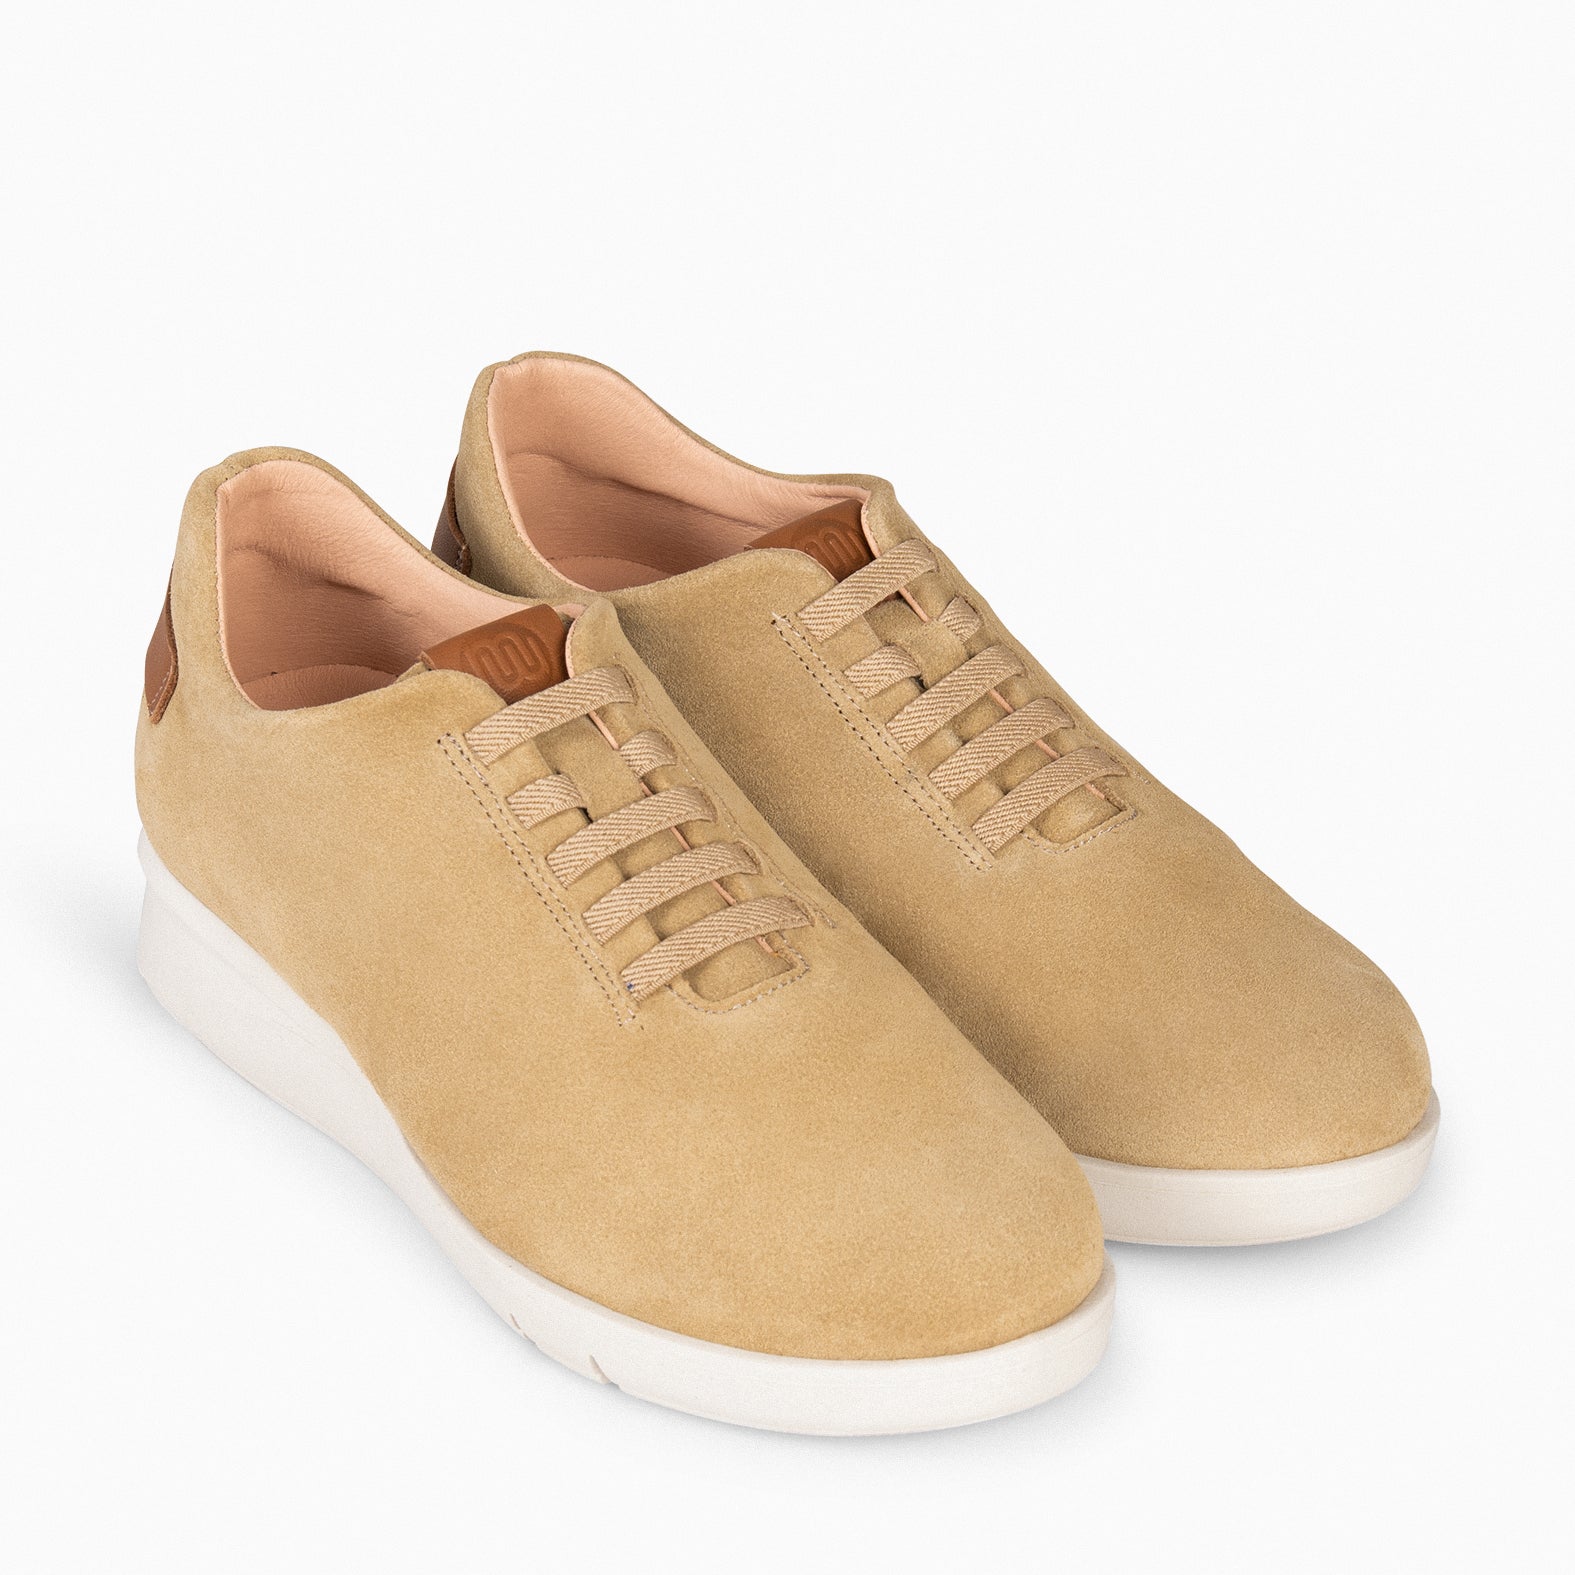 FLY – BEIGE casual sneaker with elastic laces